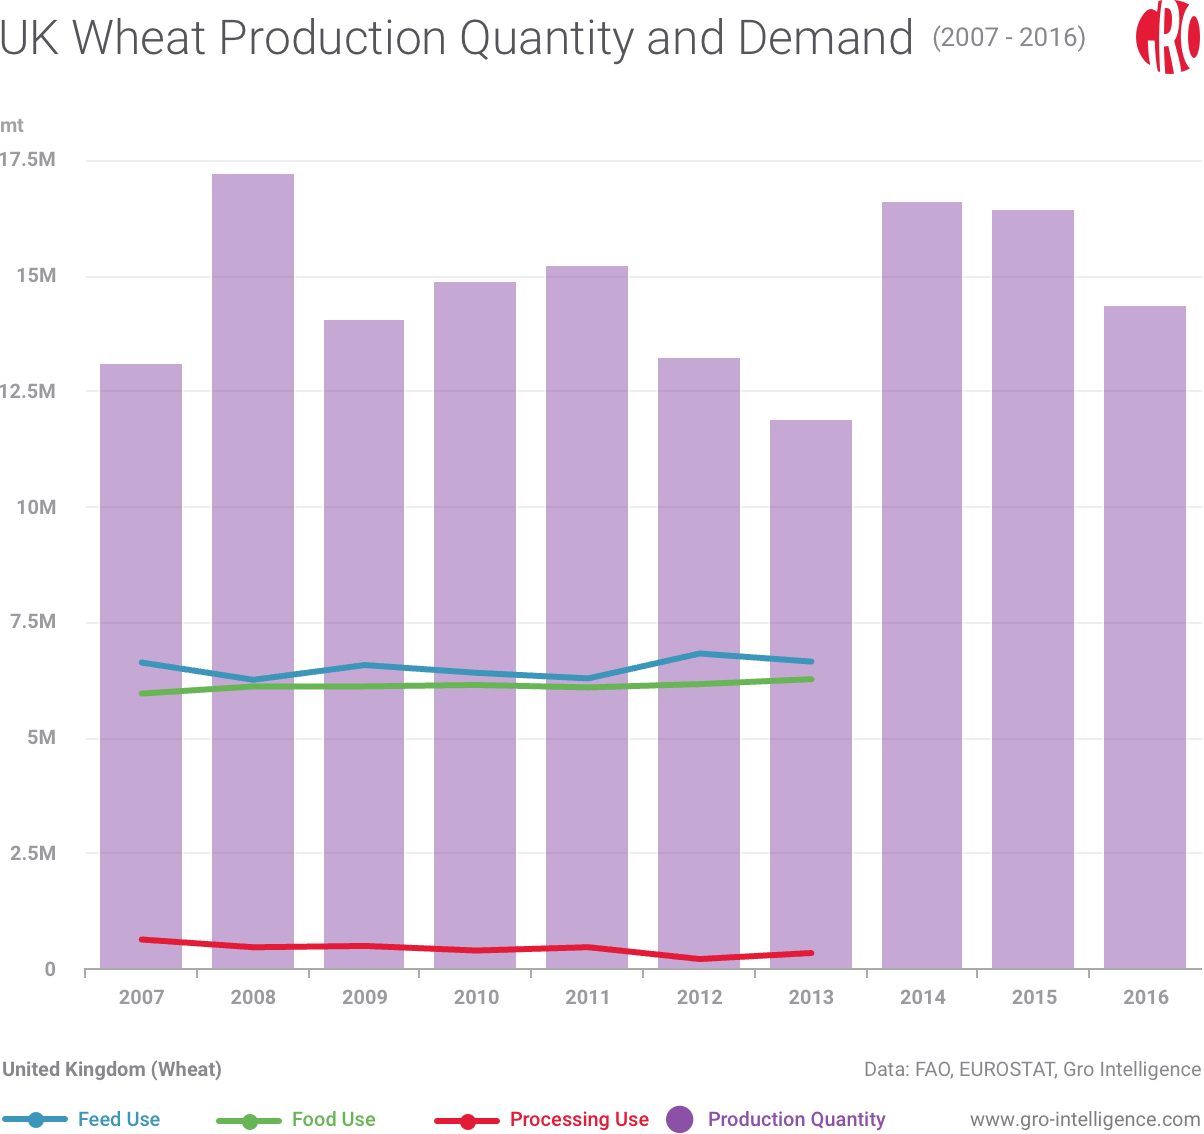 UK Wheat Production Quantity and Demand